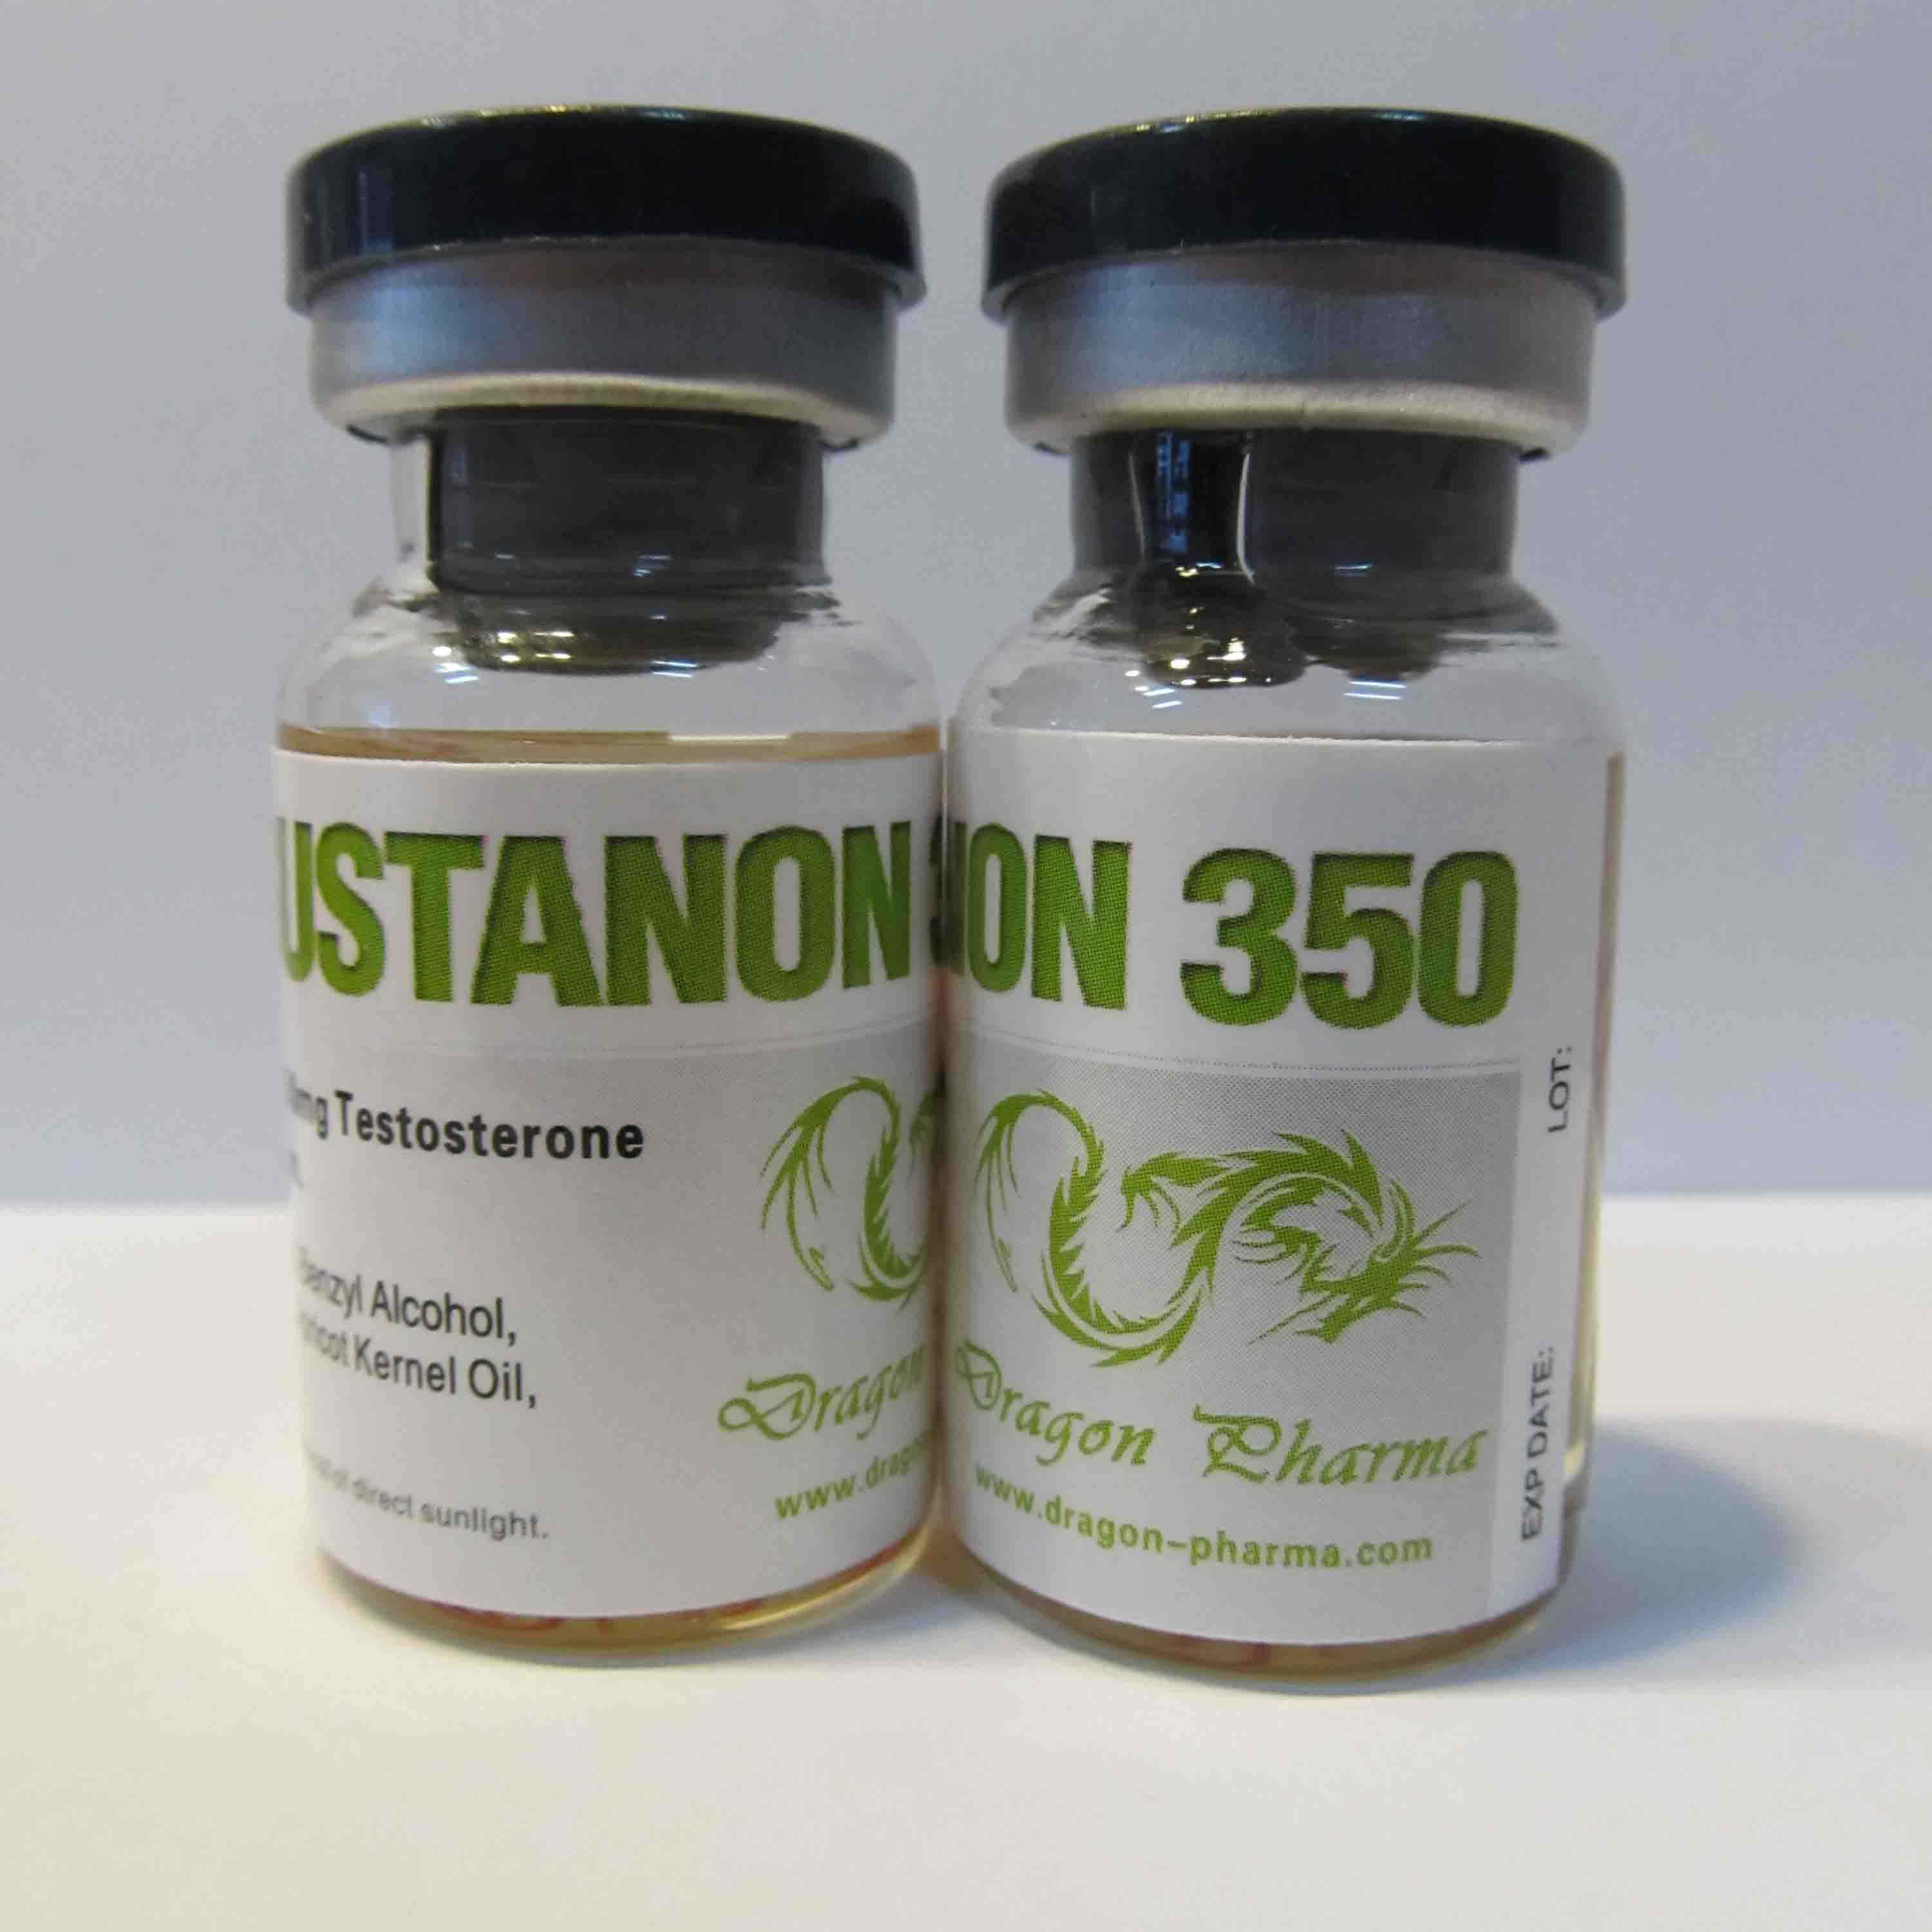 Find Out How You Can Get Legal Anabolic Steroids